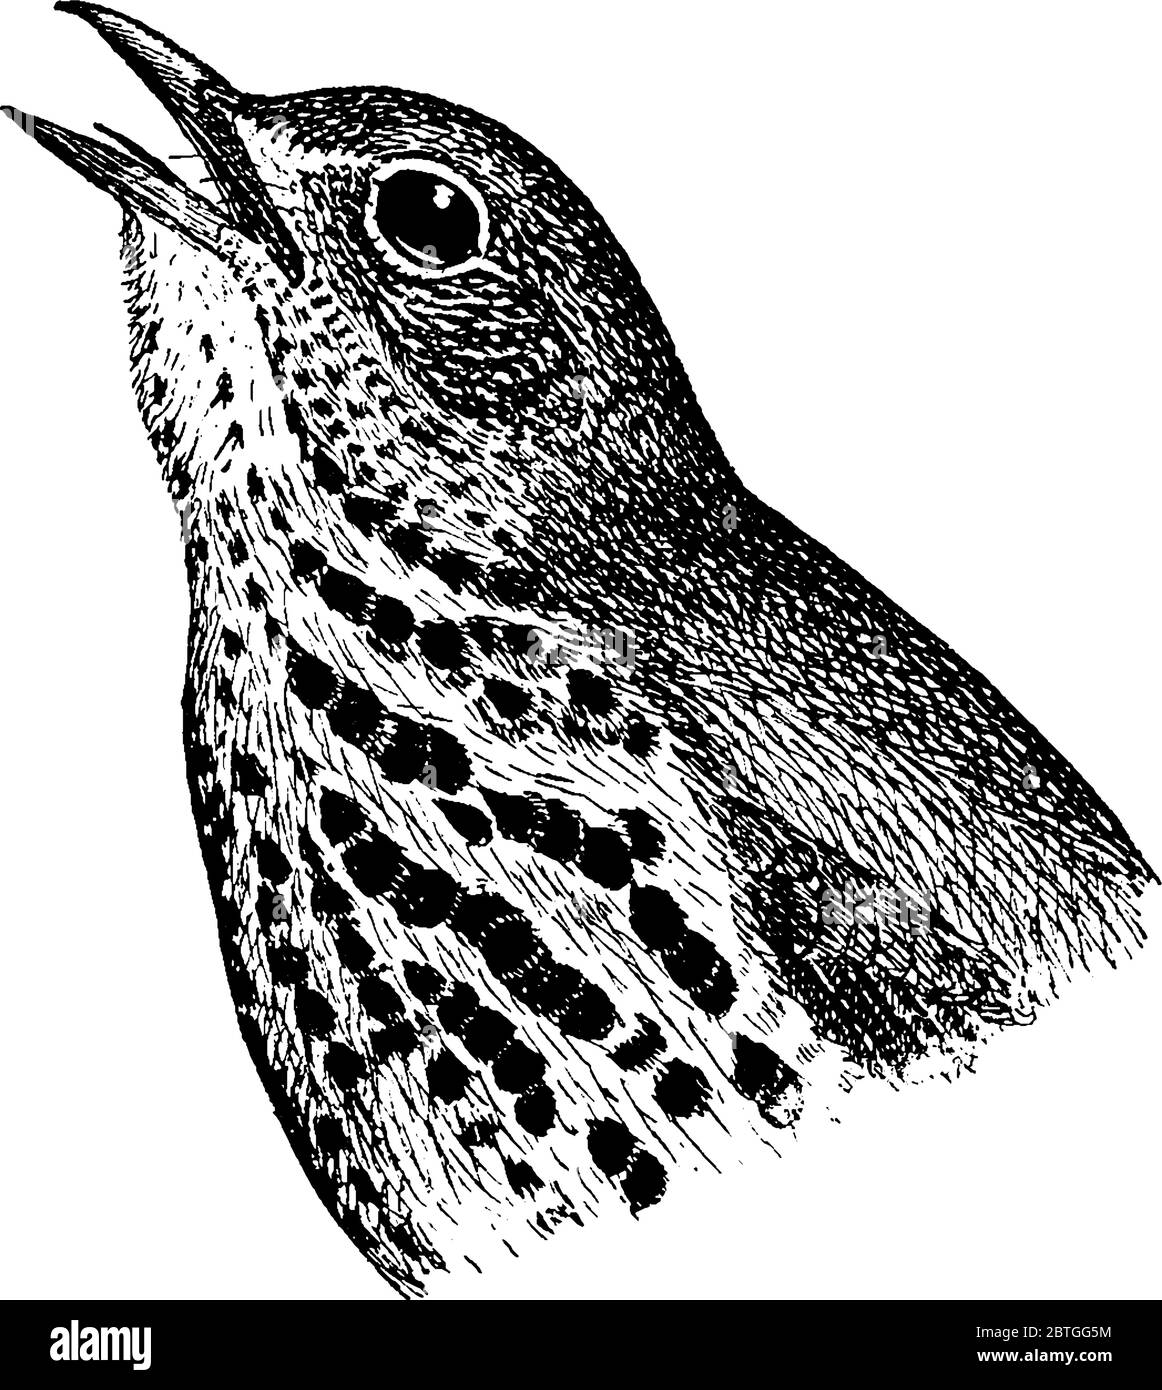 The Wood Thrush, Hylocichla mustelina, a North American passerine bird with it's beak wide opened, vintage line drawing or engraving illustration. Stock Vector